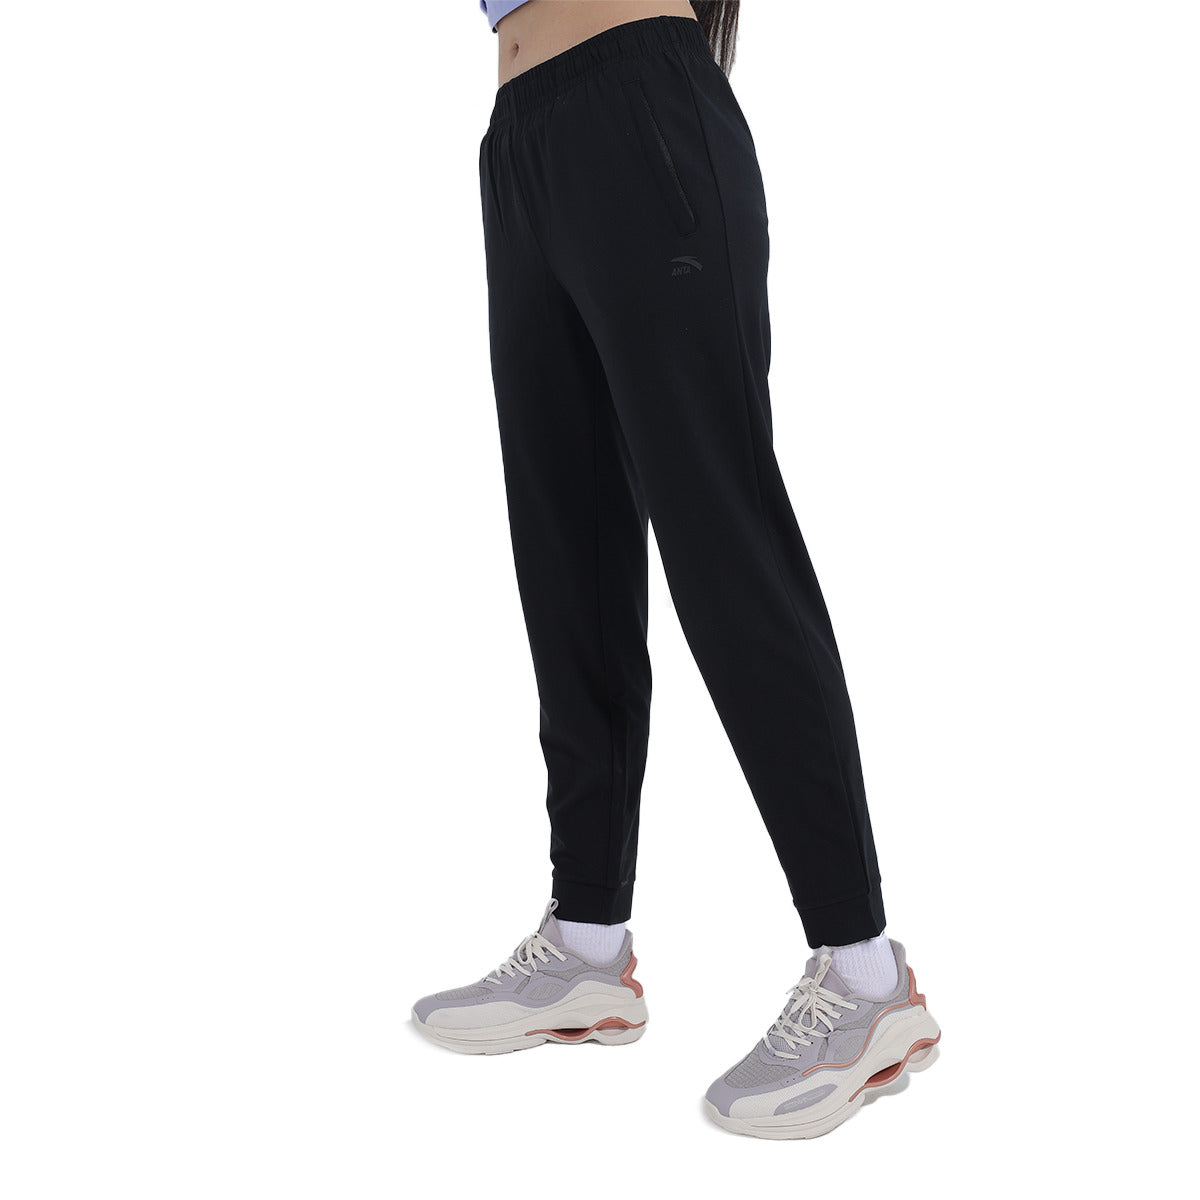 Anta Knit Track Casual Sweatpants For Women, Black